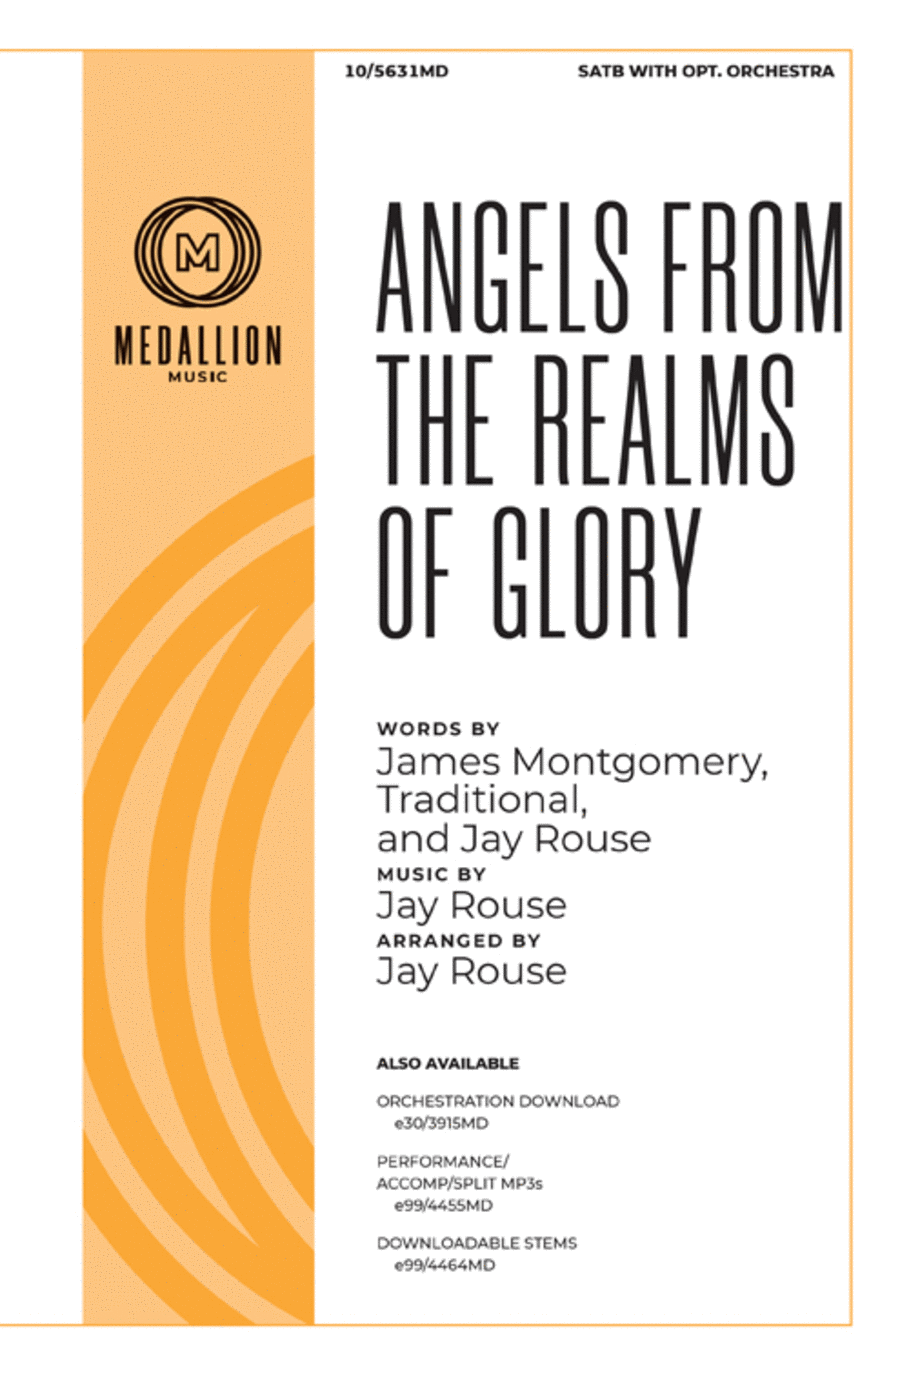 Angels from the Realms of Glory